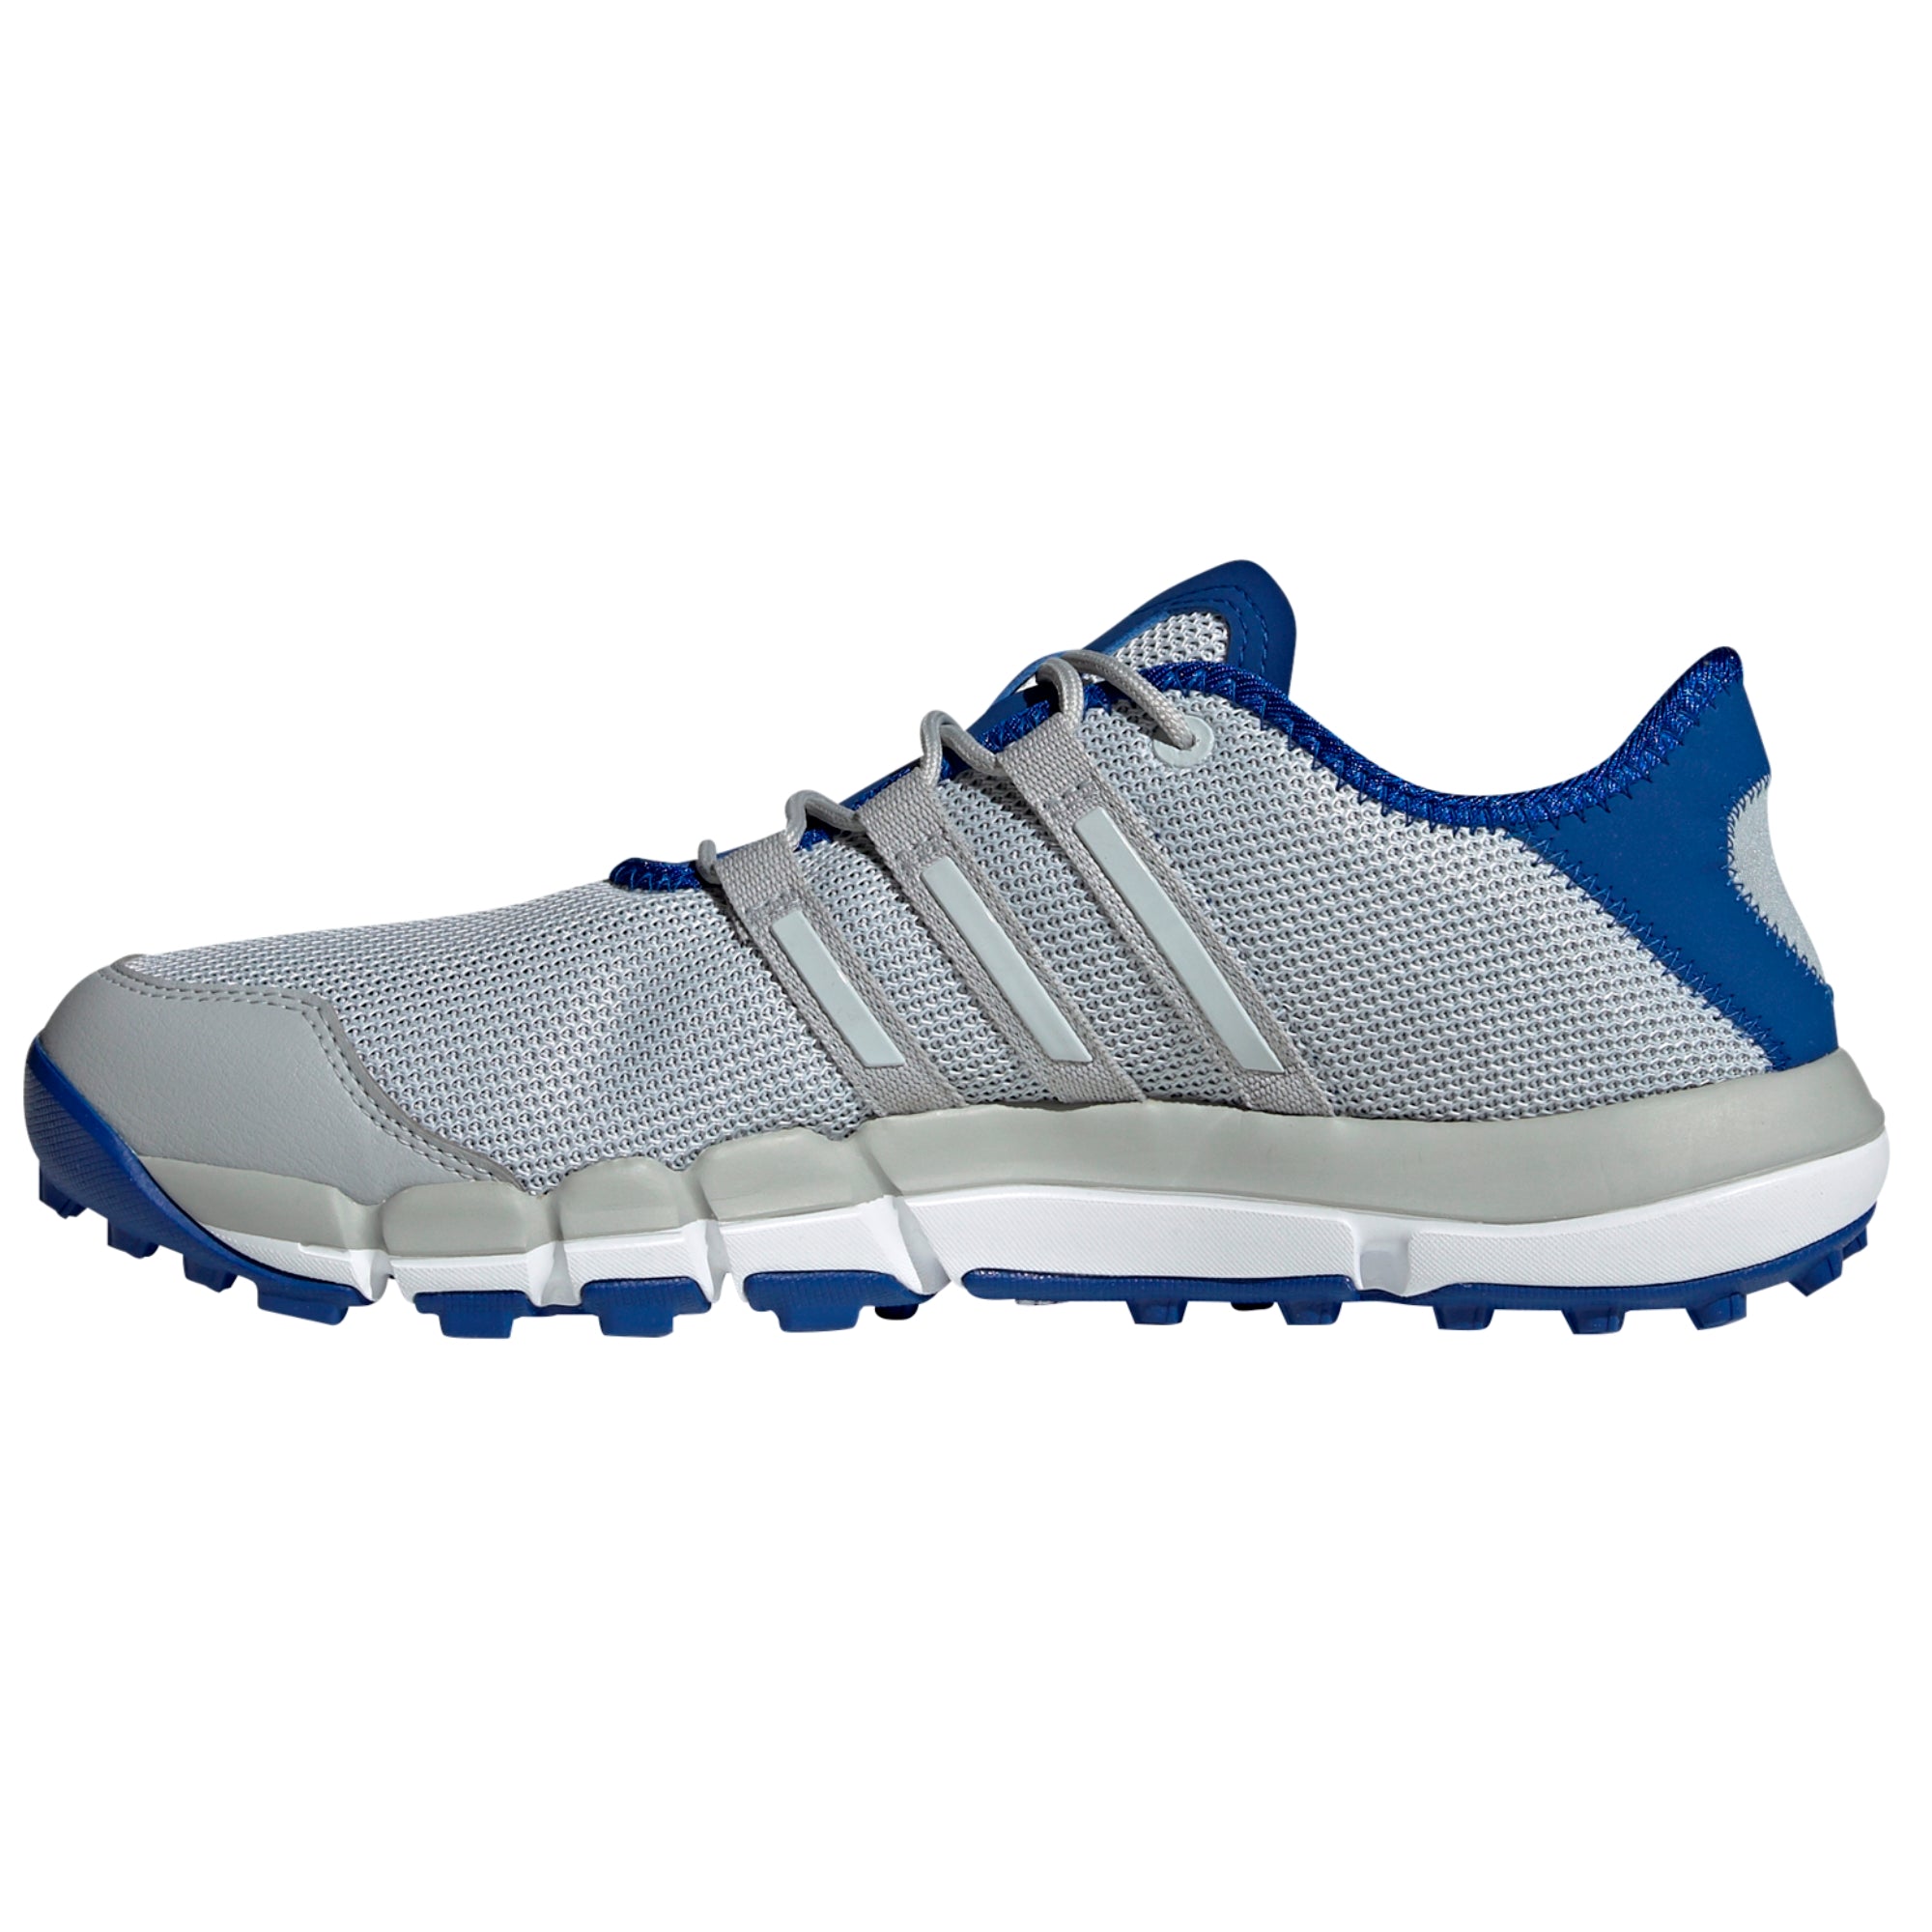 adidas climacool golf shoes price